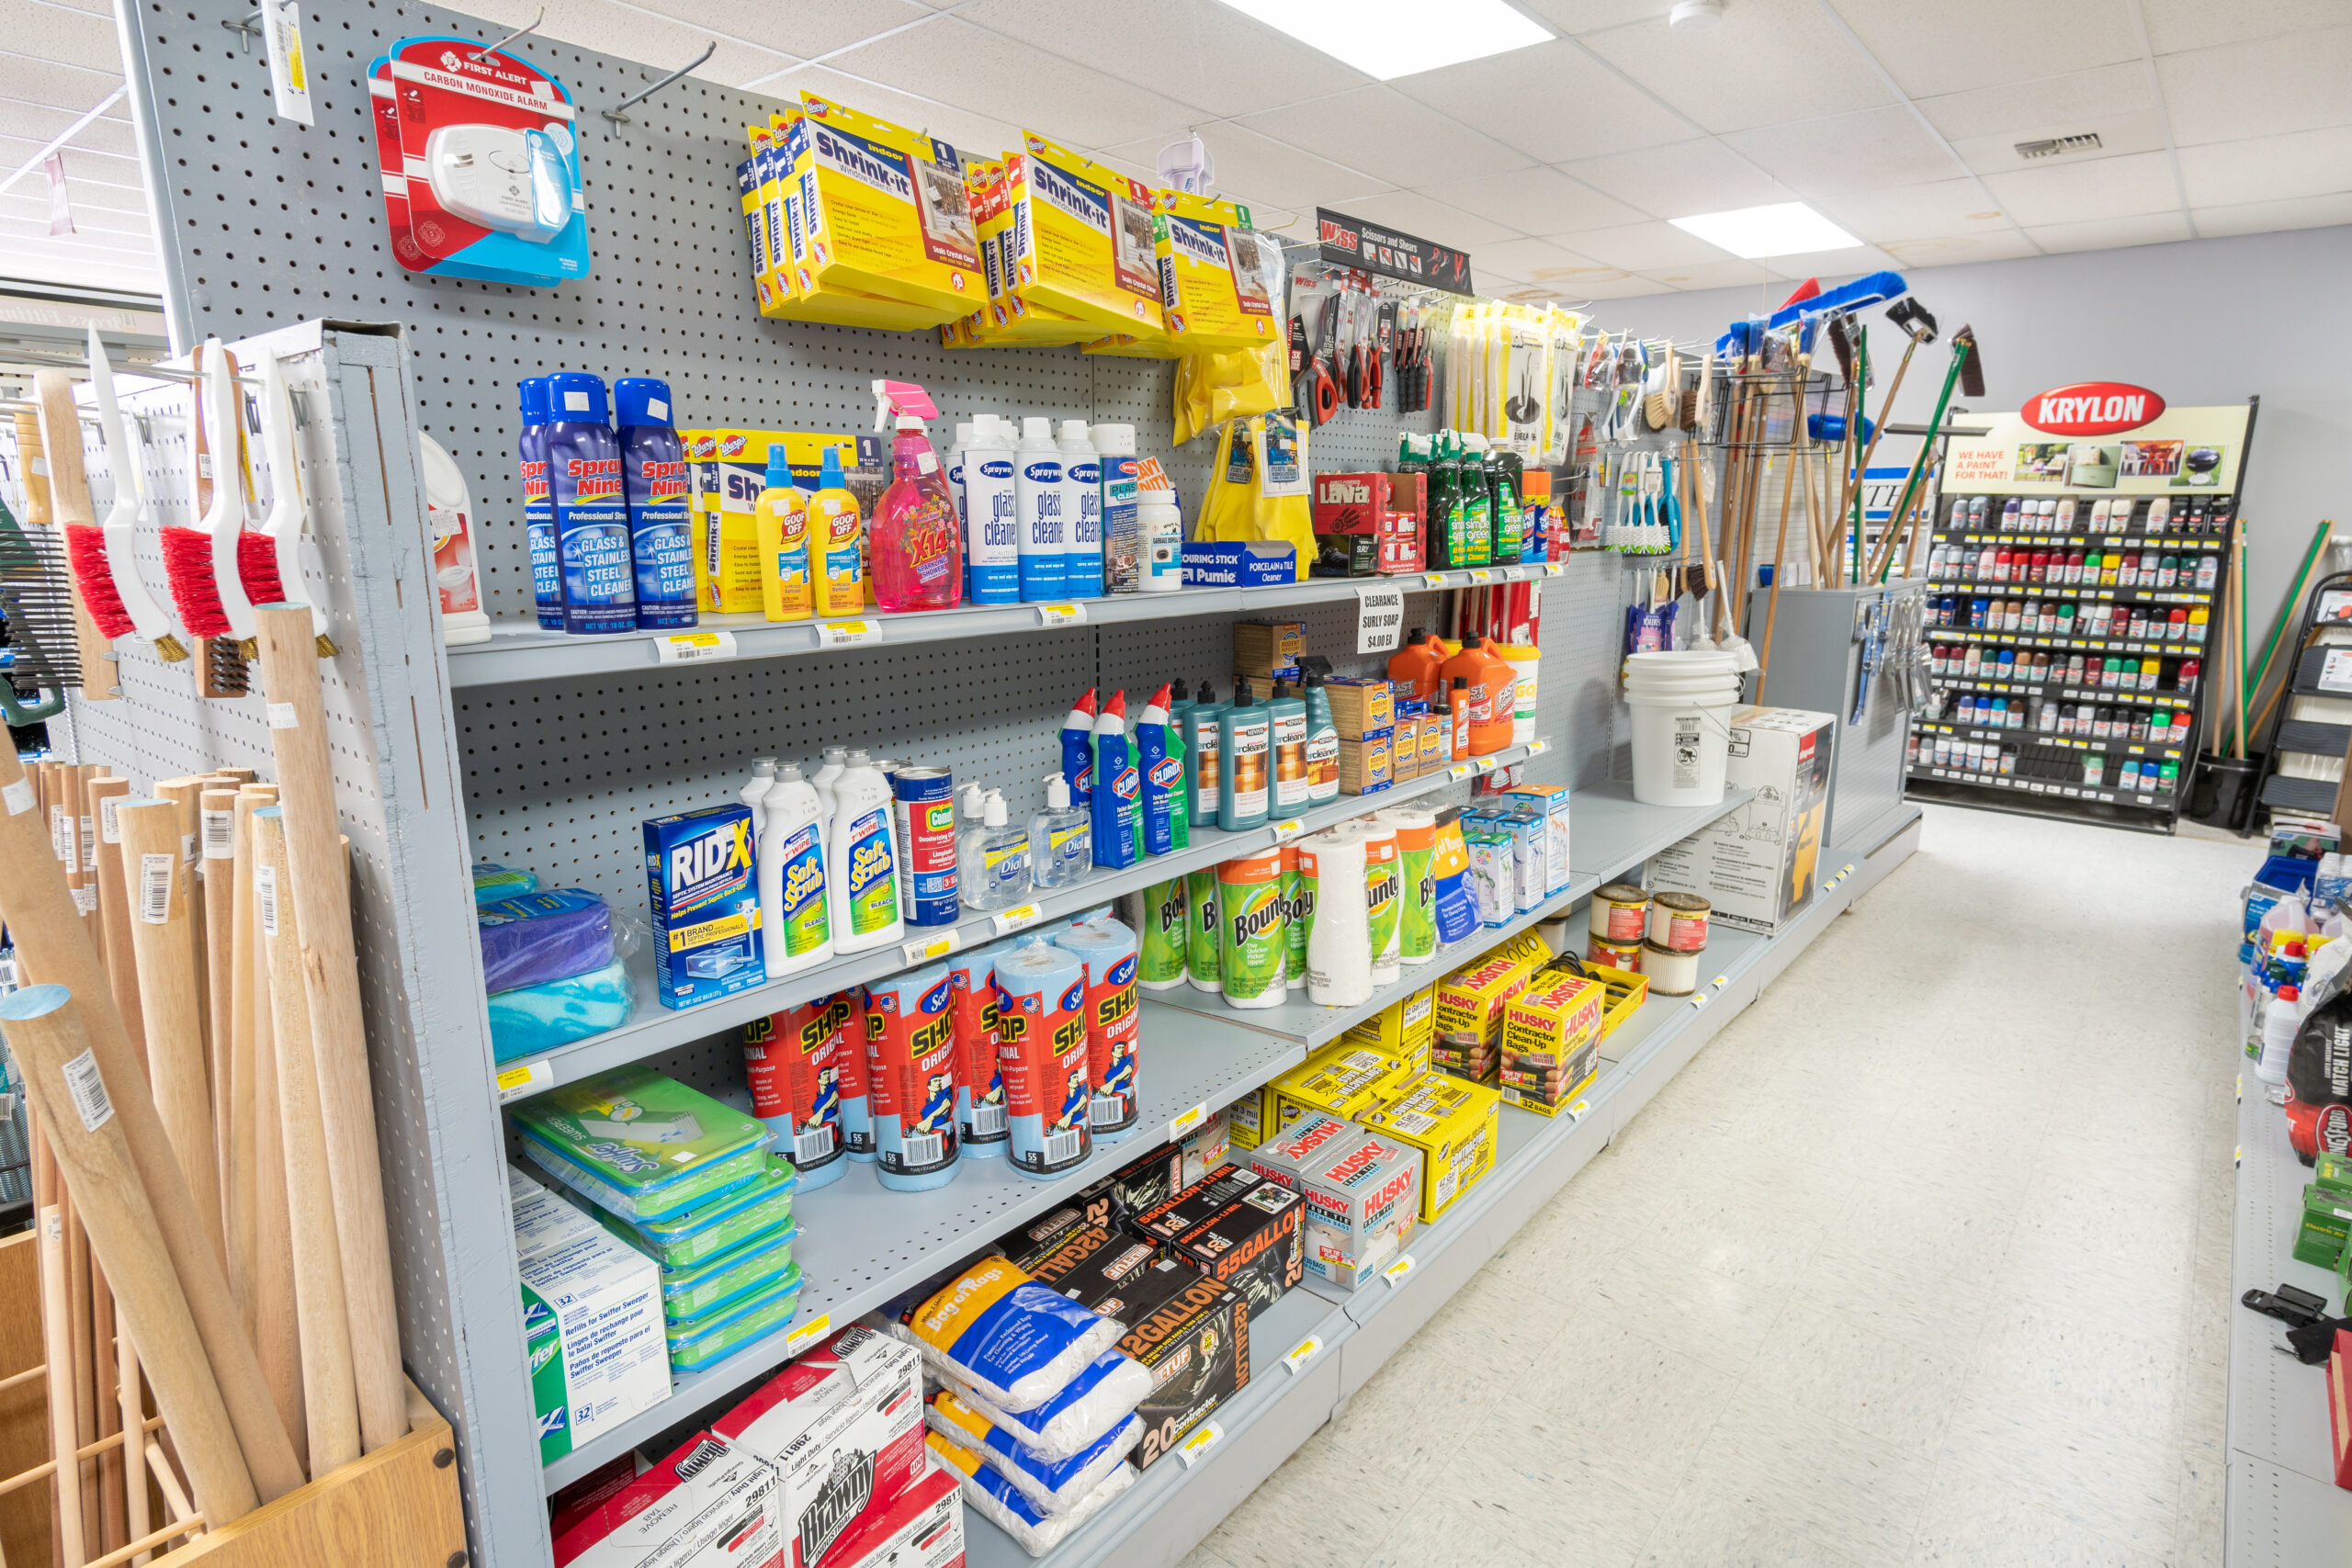 A shelf in Four Star Supply, full of cleaning supplies like bathroom cleaner, shop vacs, cleaning rags, and other products.